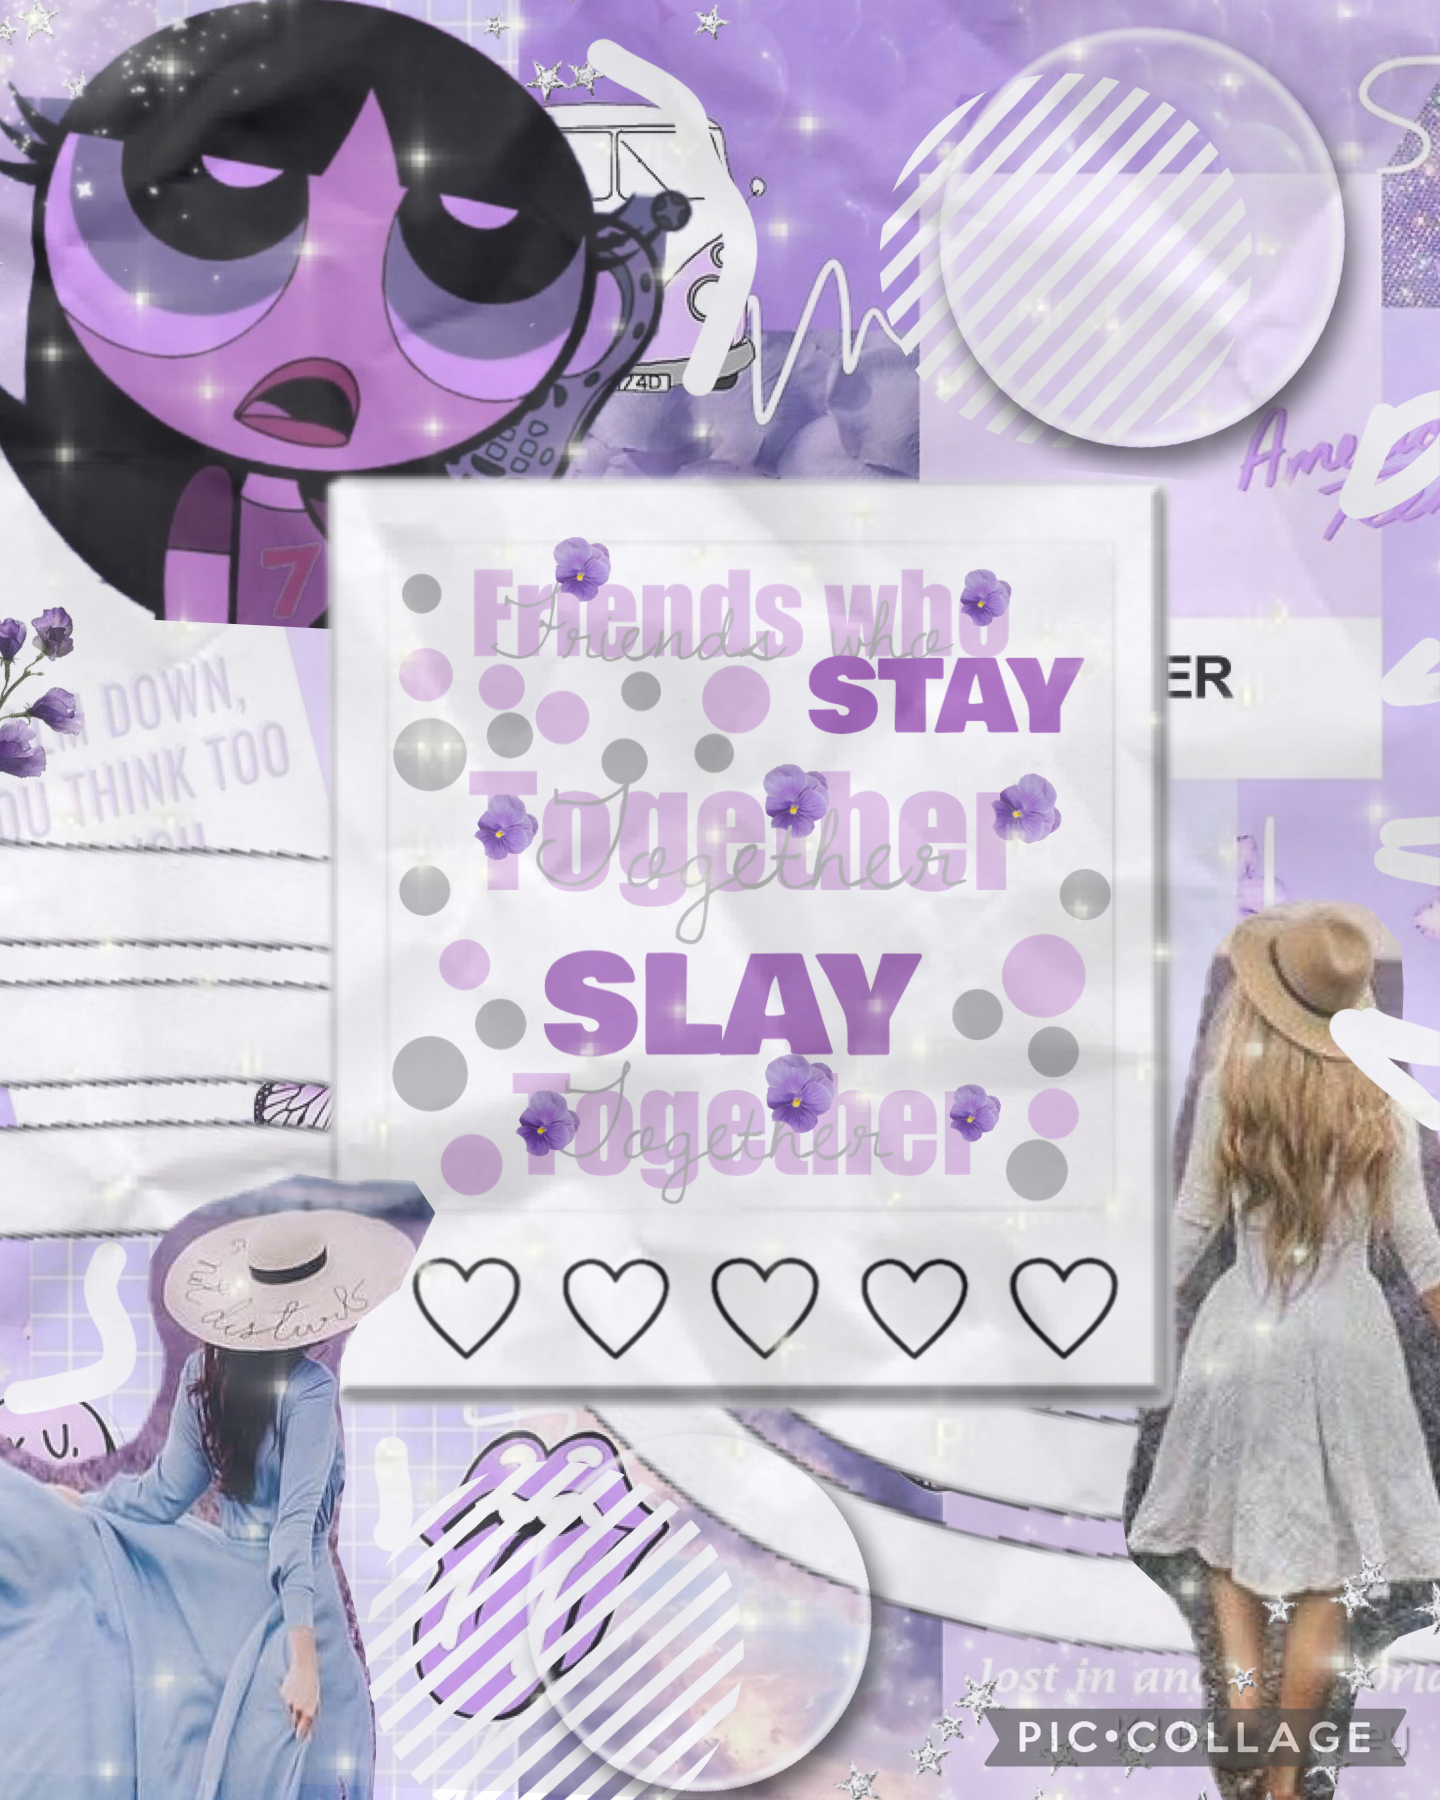 💜5/13/21💜 (T A P)
This was inspired again! I kinda like this but at the same time I don’t. It also took me a while to make this. No Qotd this time sorry. (Let me know what you think of this!)